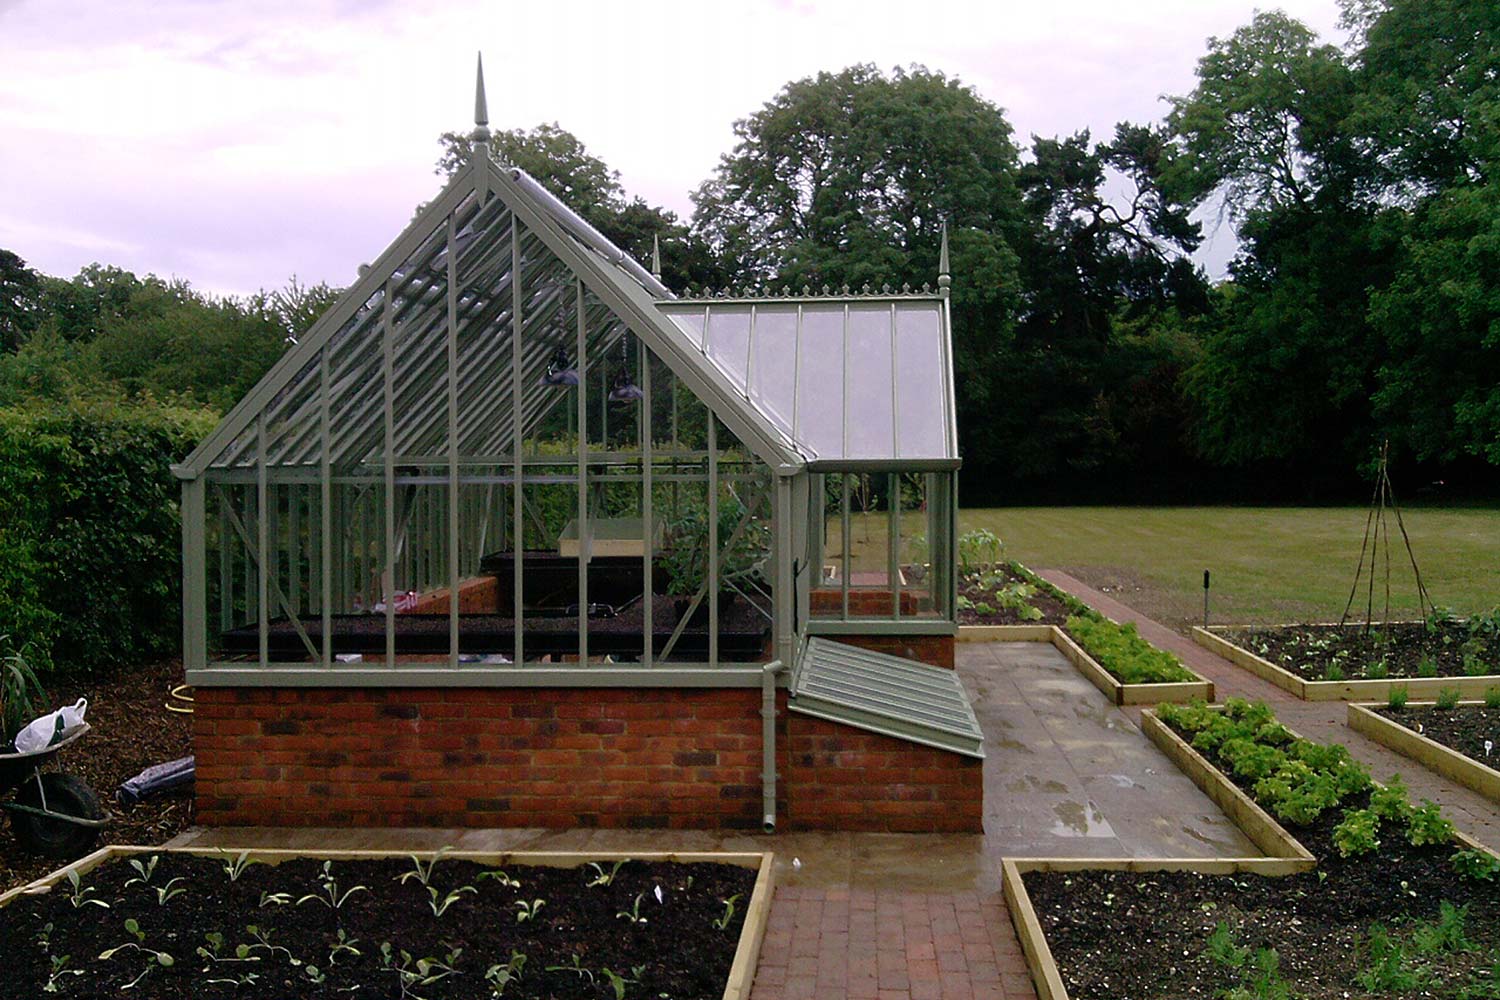 The Augusta Greenhouse from the Alitex Kew Greenhouse Collection